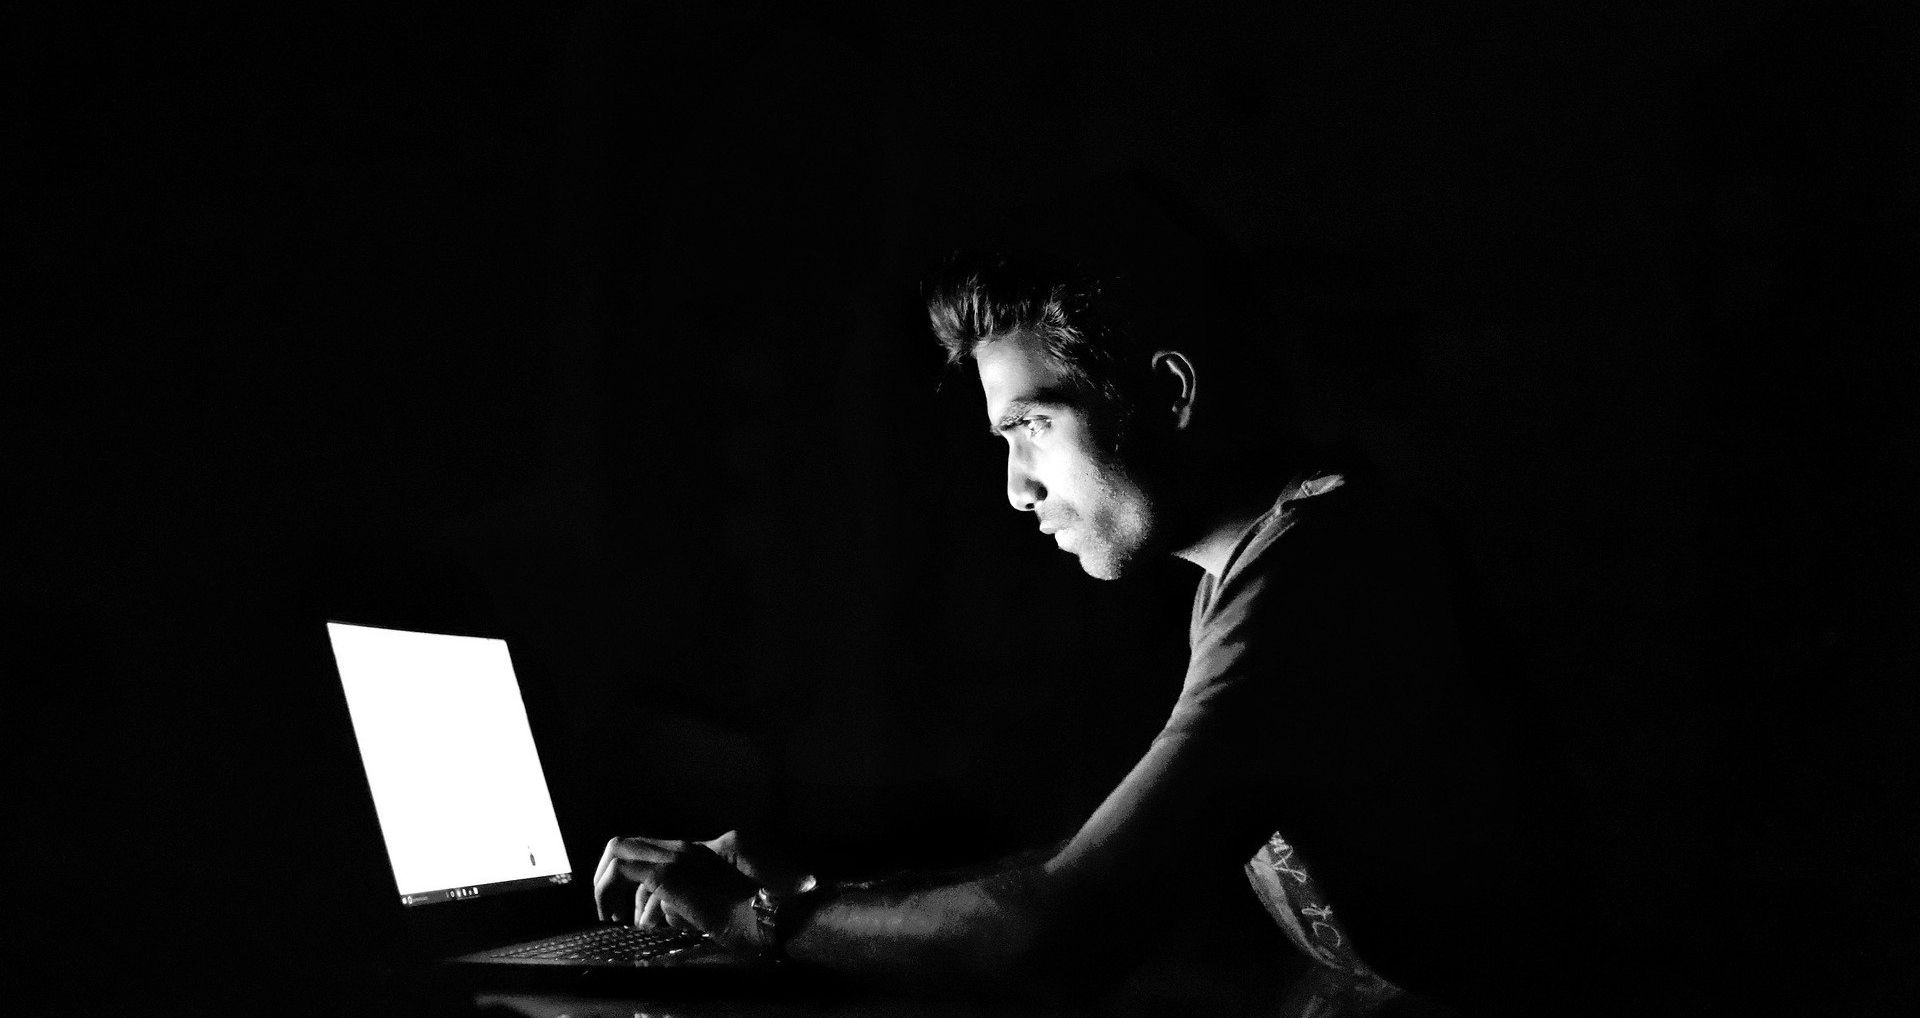 man using laptop in dark room with black and white filter